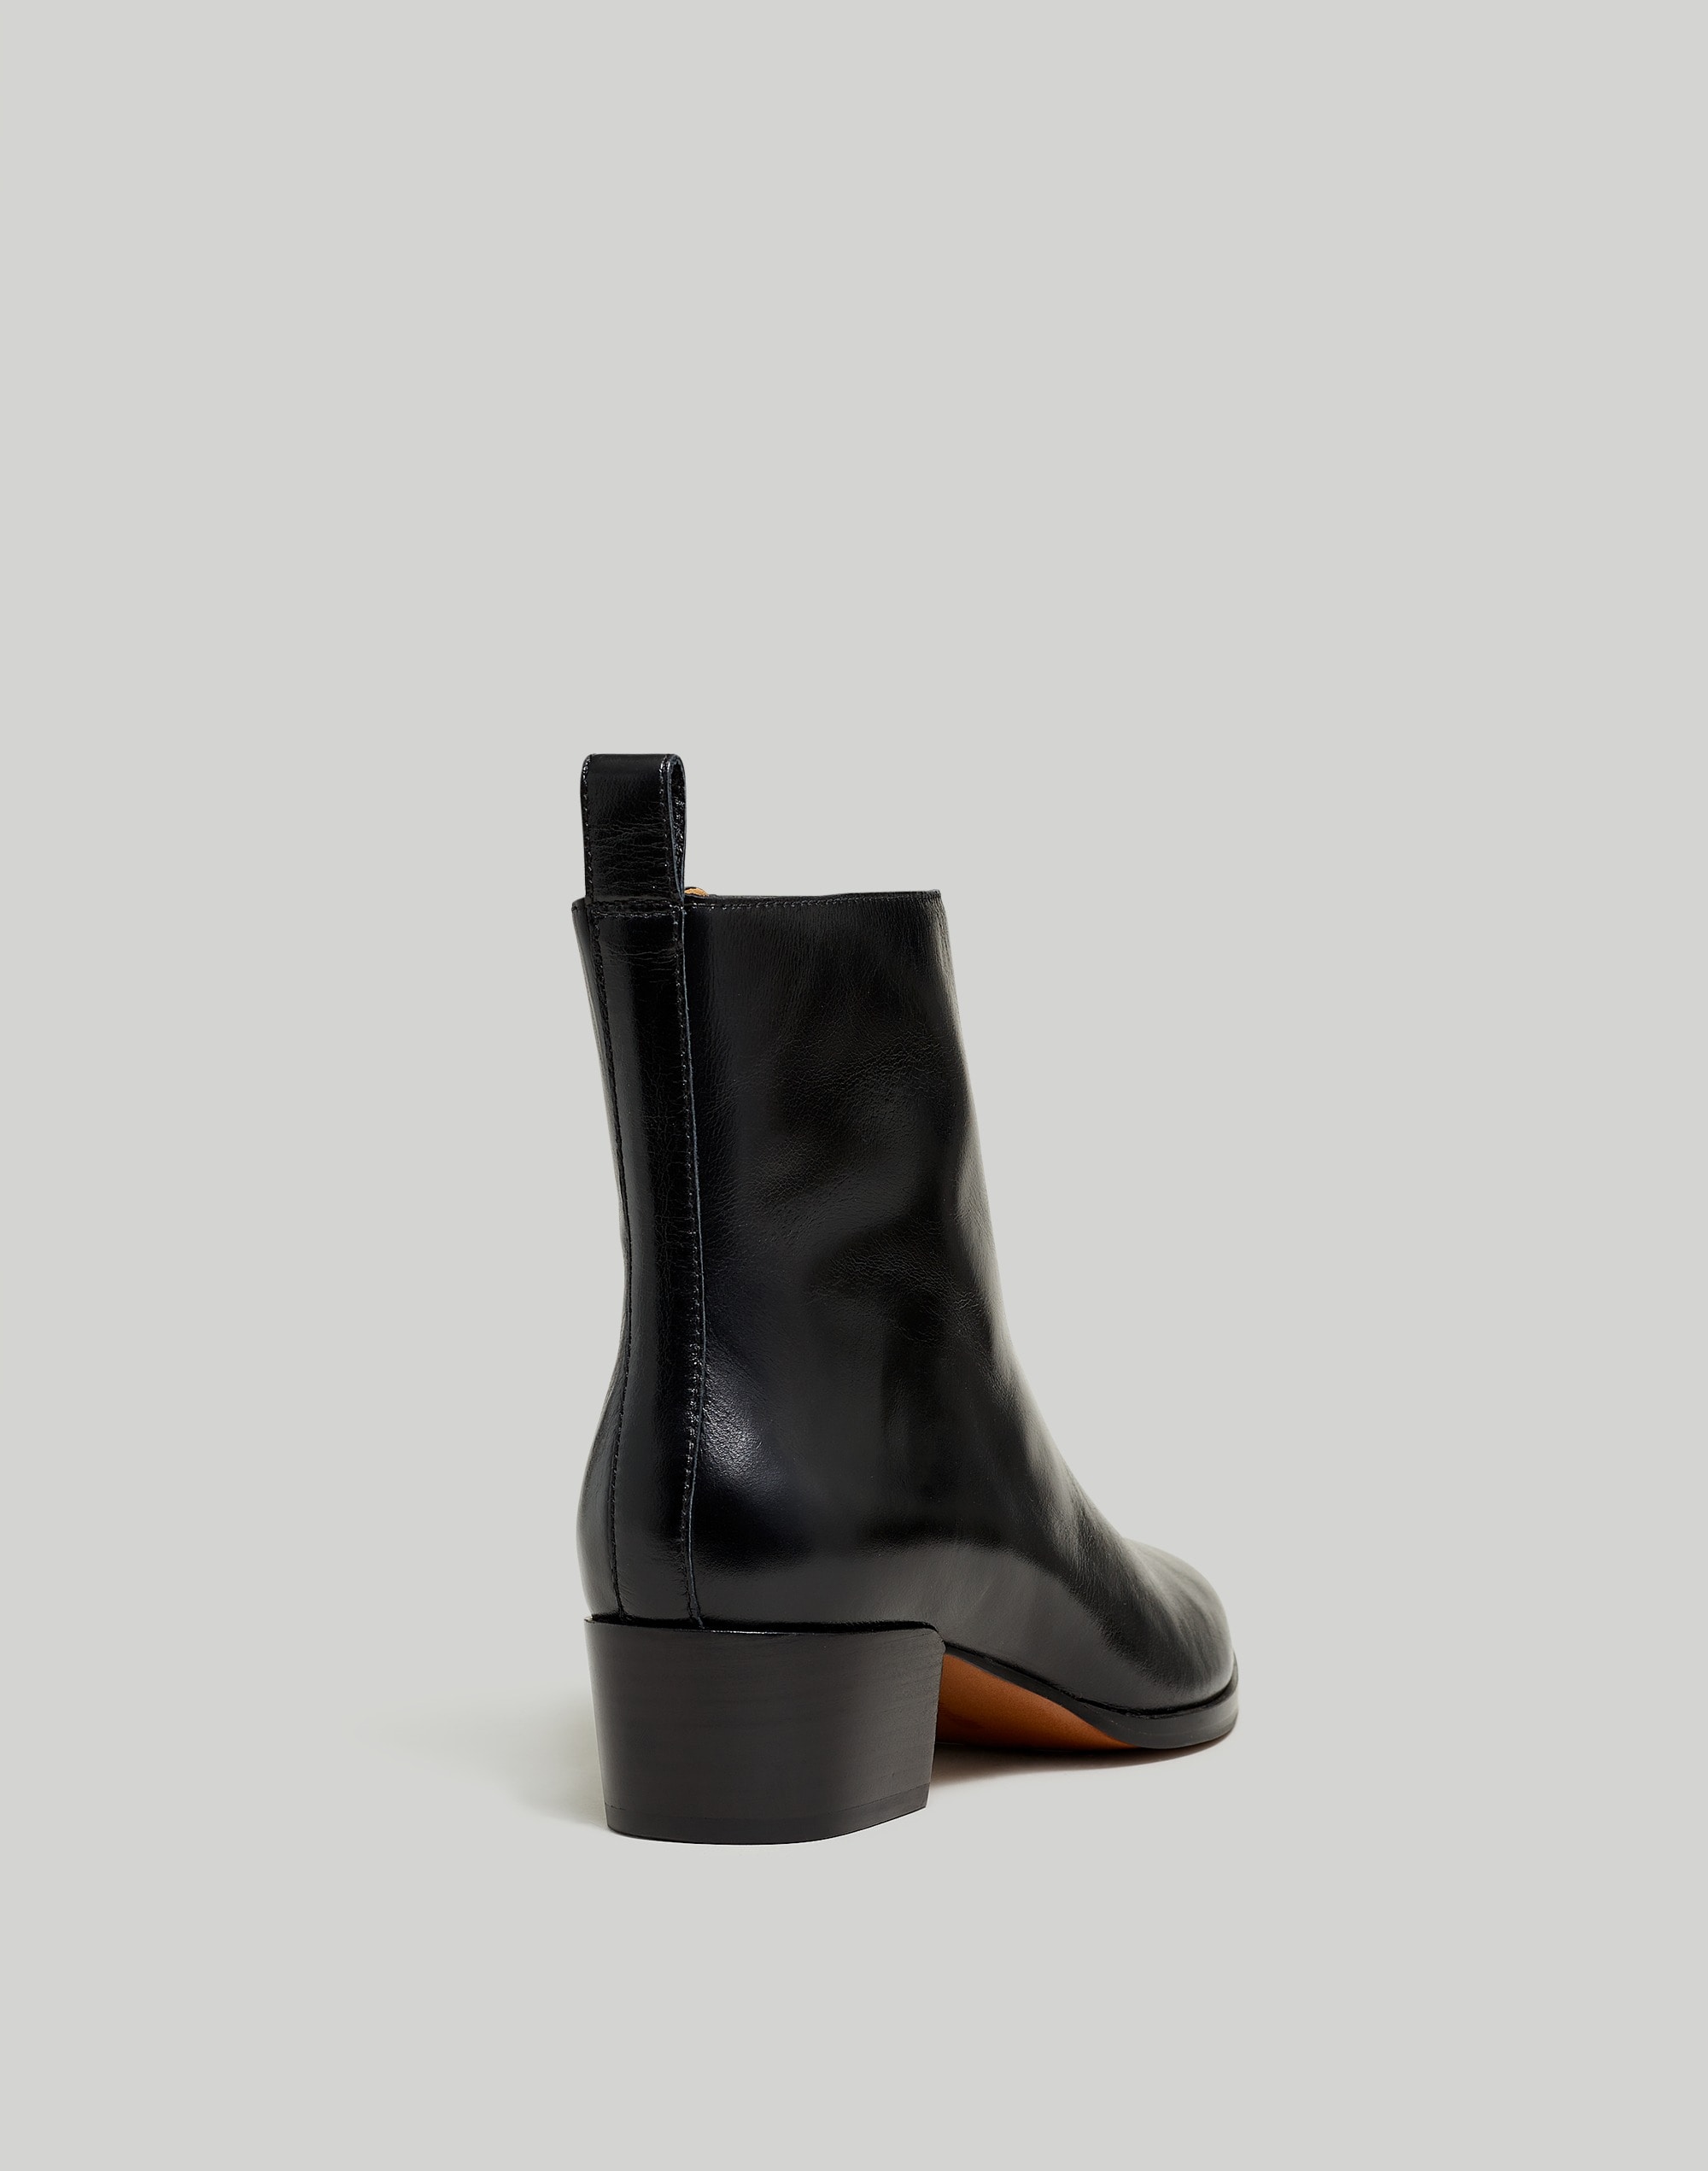 The Jessa Ankle Boot